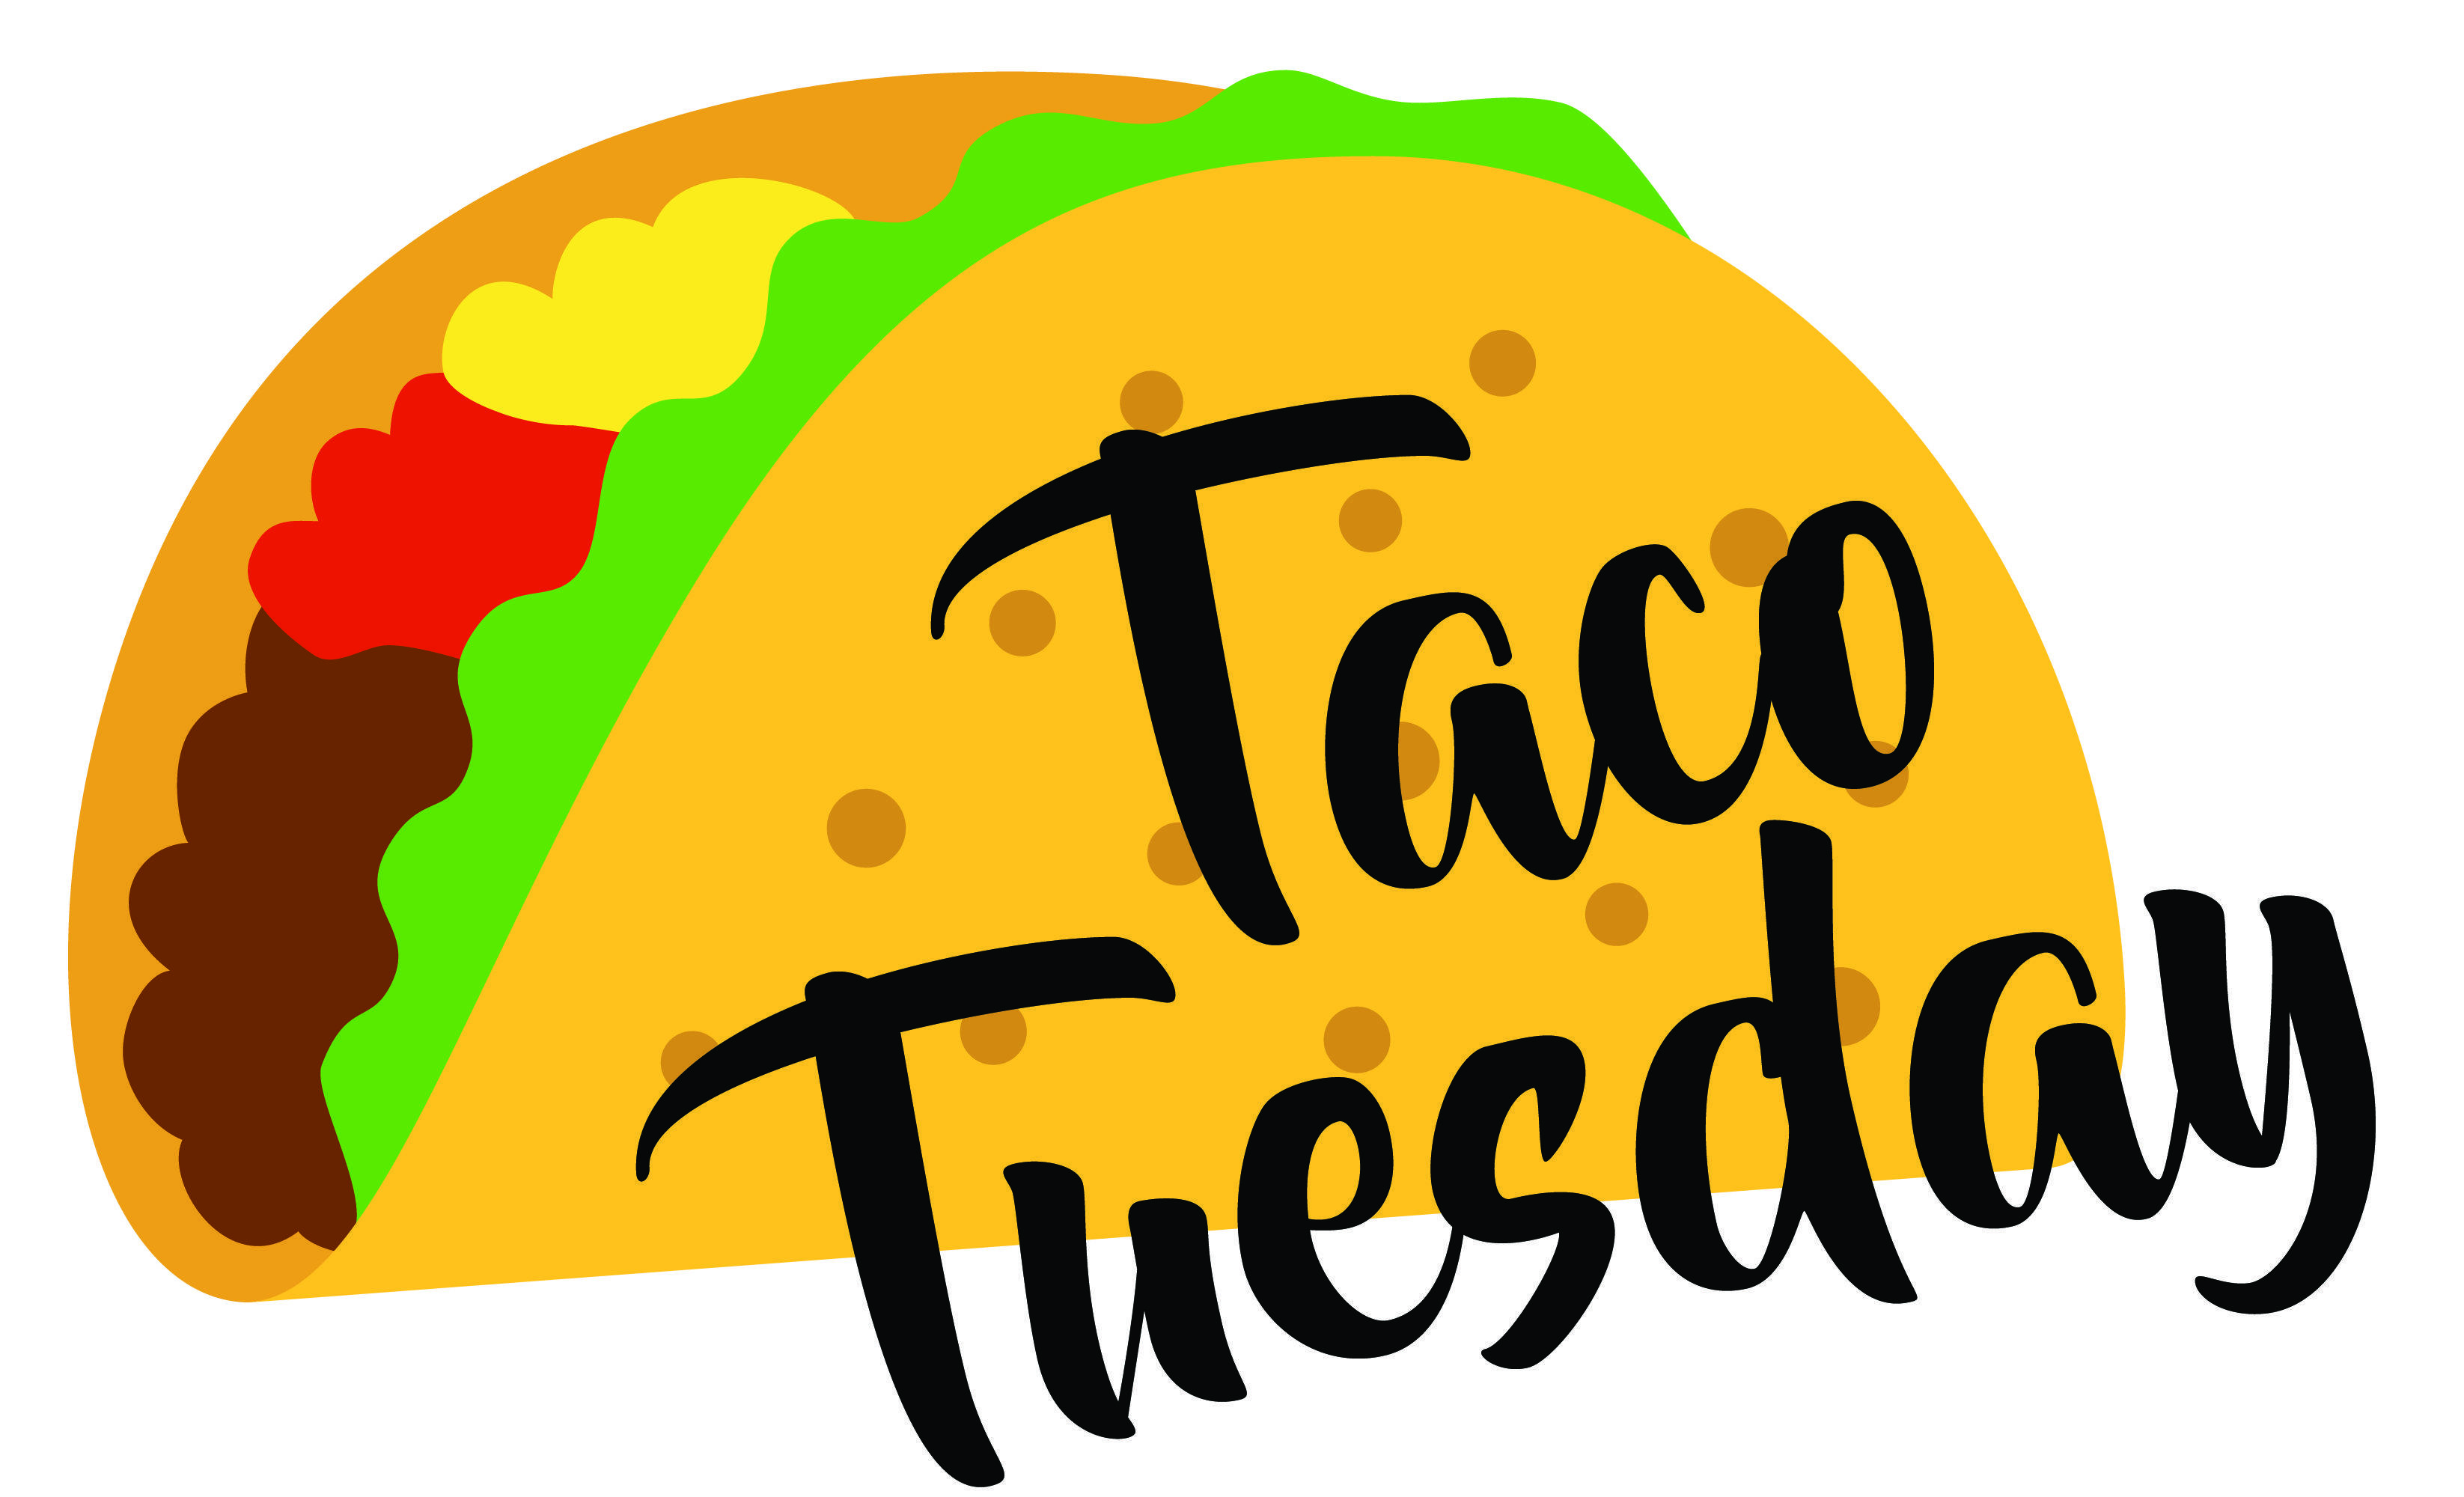 THE RETURN OF TACO TUESDAYS! #1 TUESDAY NIGHT IN HOUSTON!